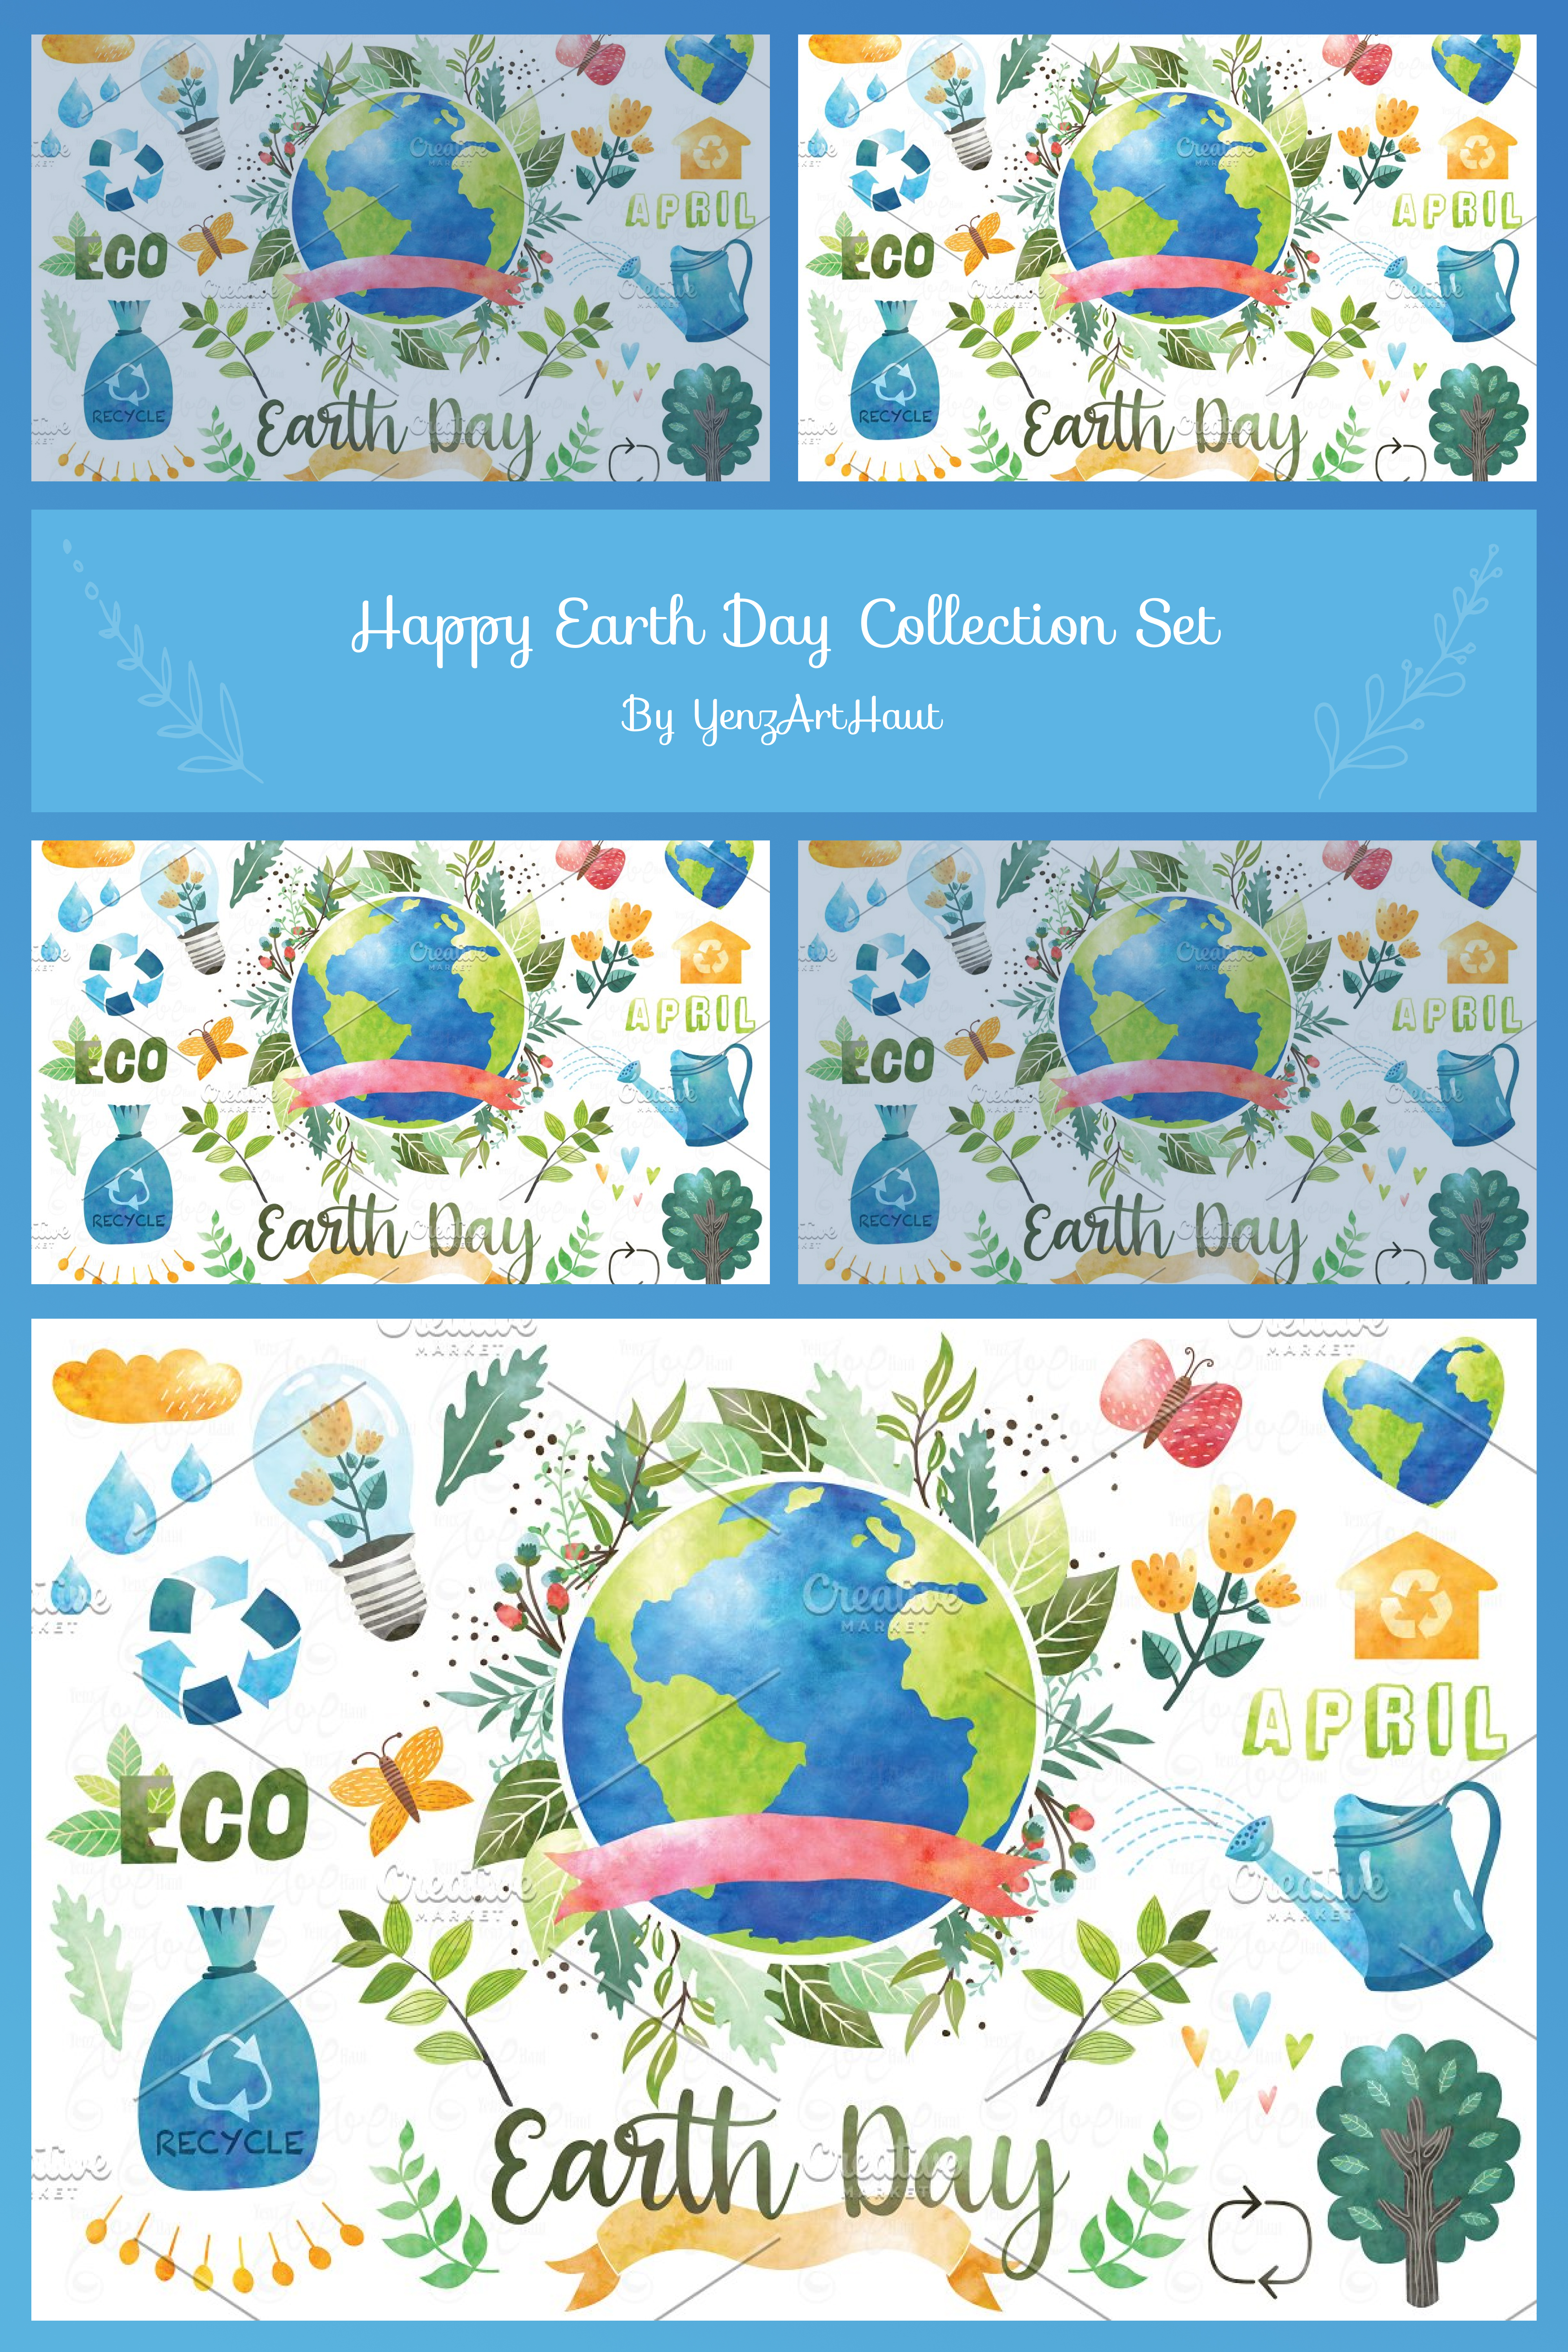 Pinterest of happy earth day collection.